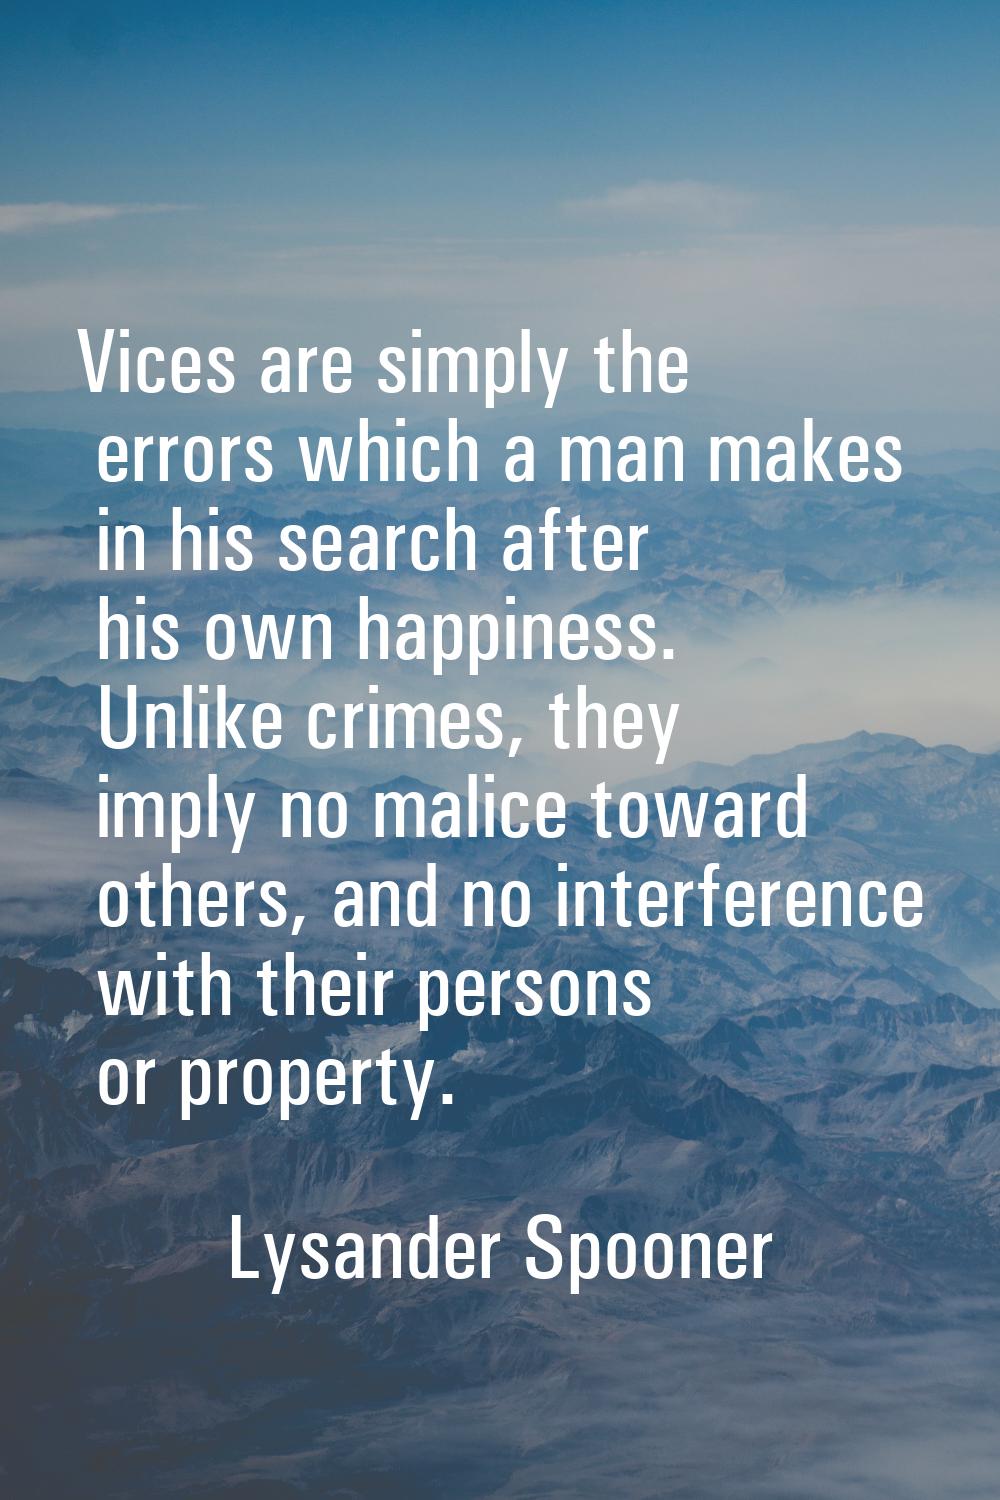 Vices are simply the errors which a man makes in his search after his own happiness. Unlike crimes,